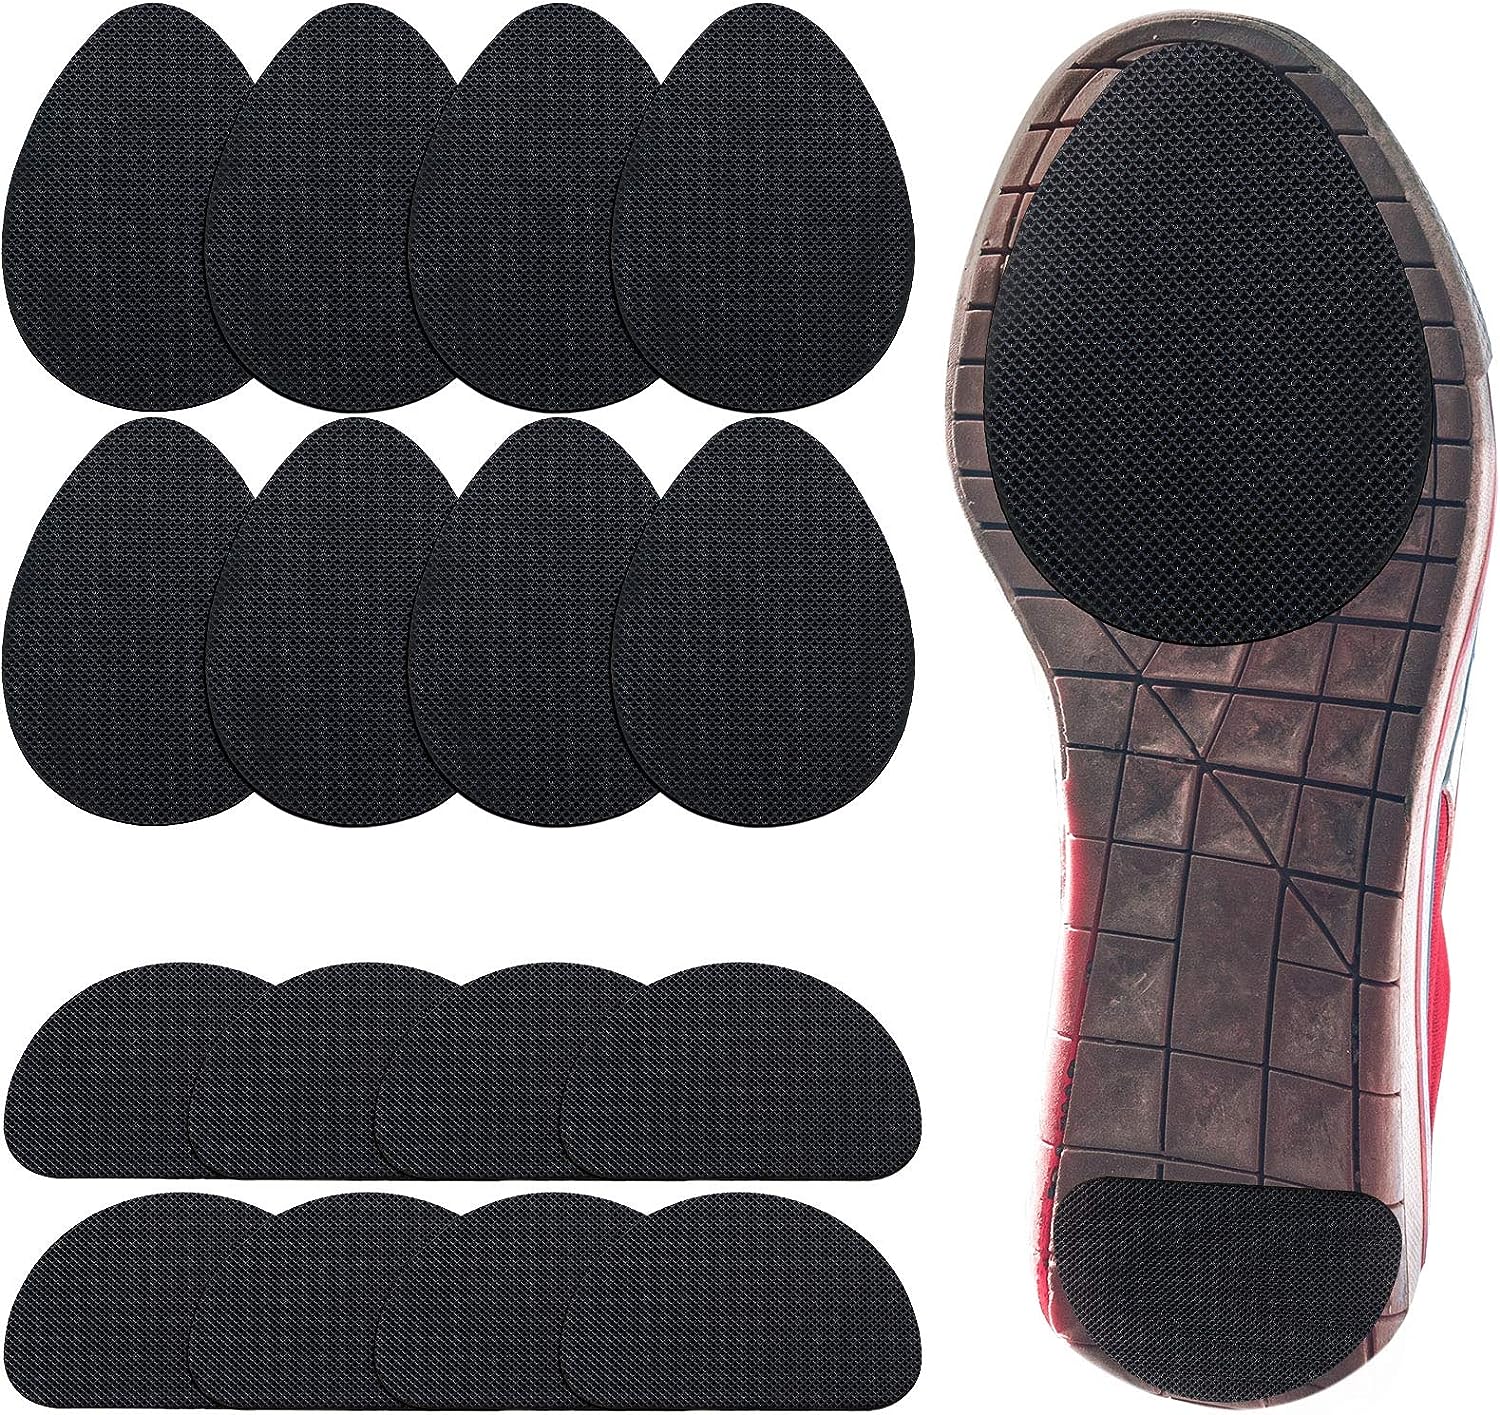 16 Pieces Non-Skid Shoe Pads Self-Adhesive Shoe Grips [...]